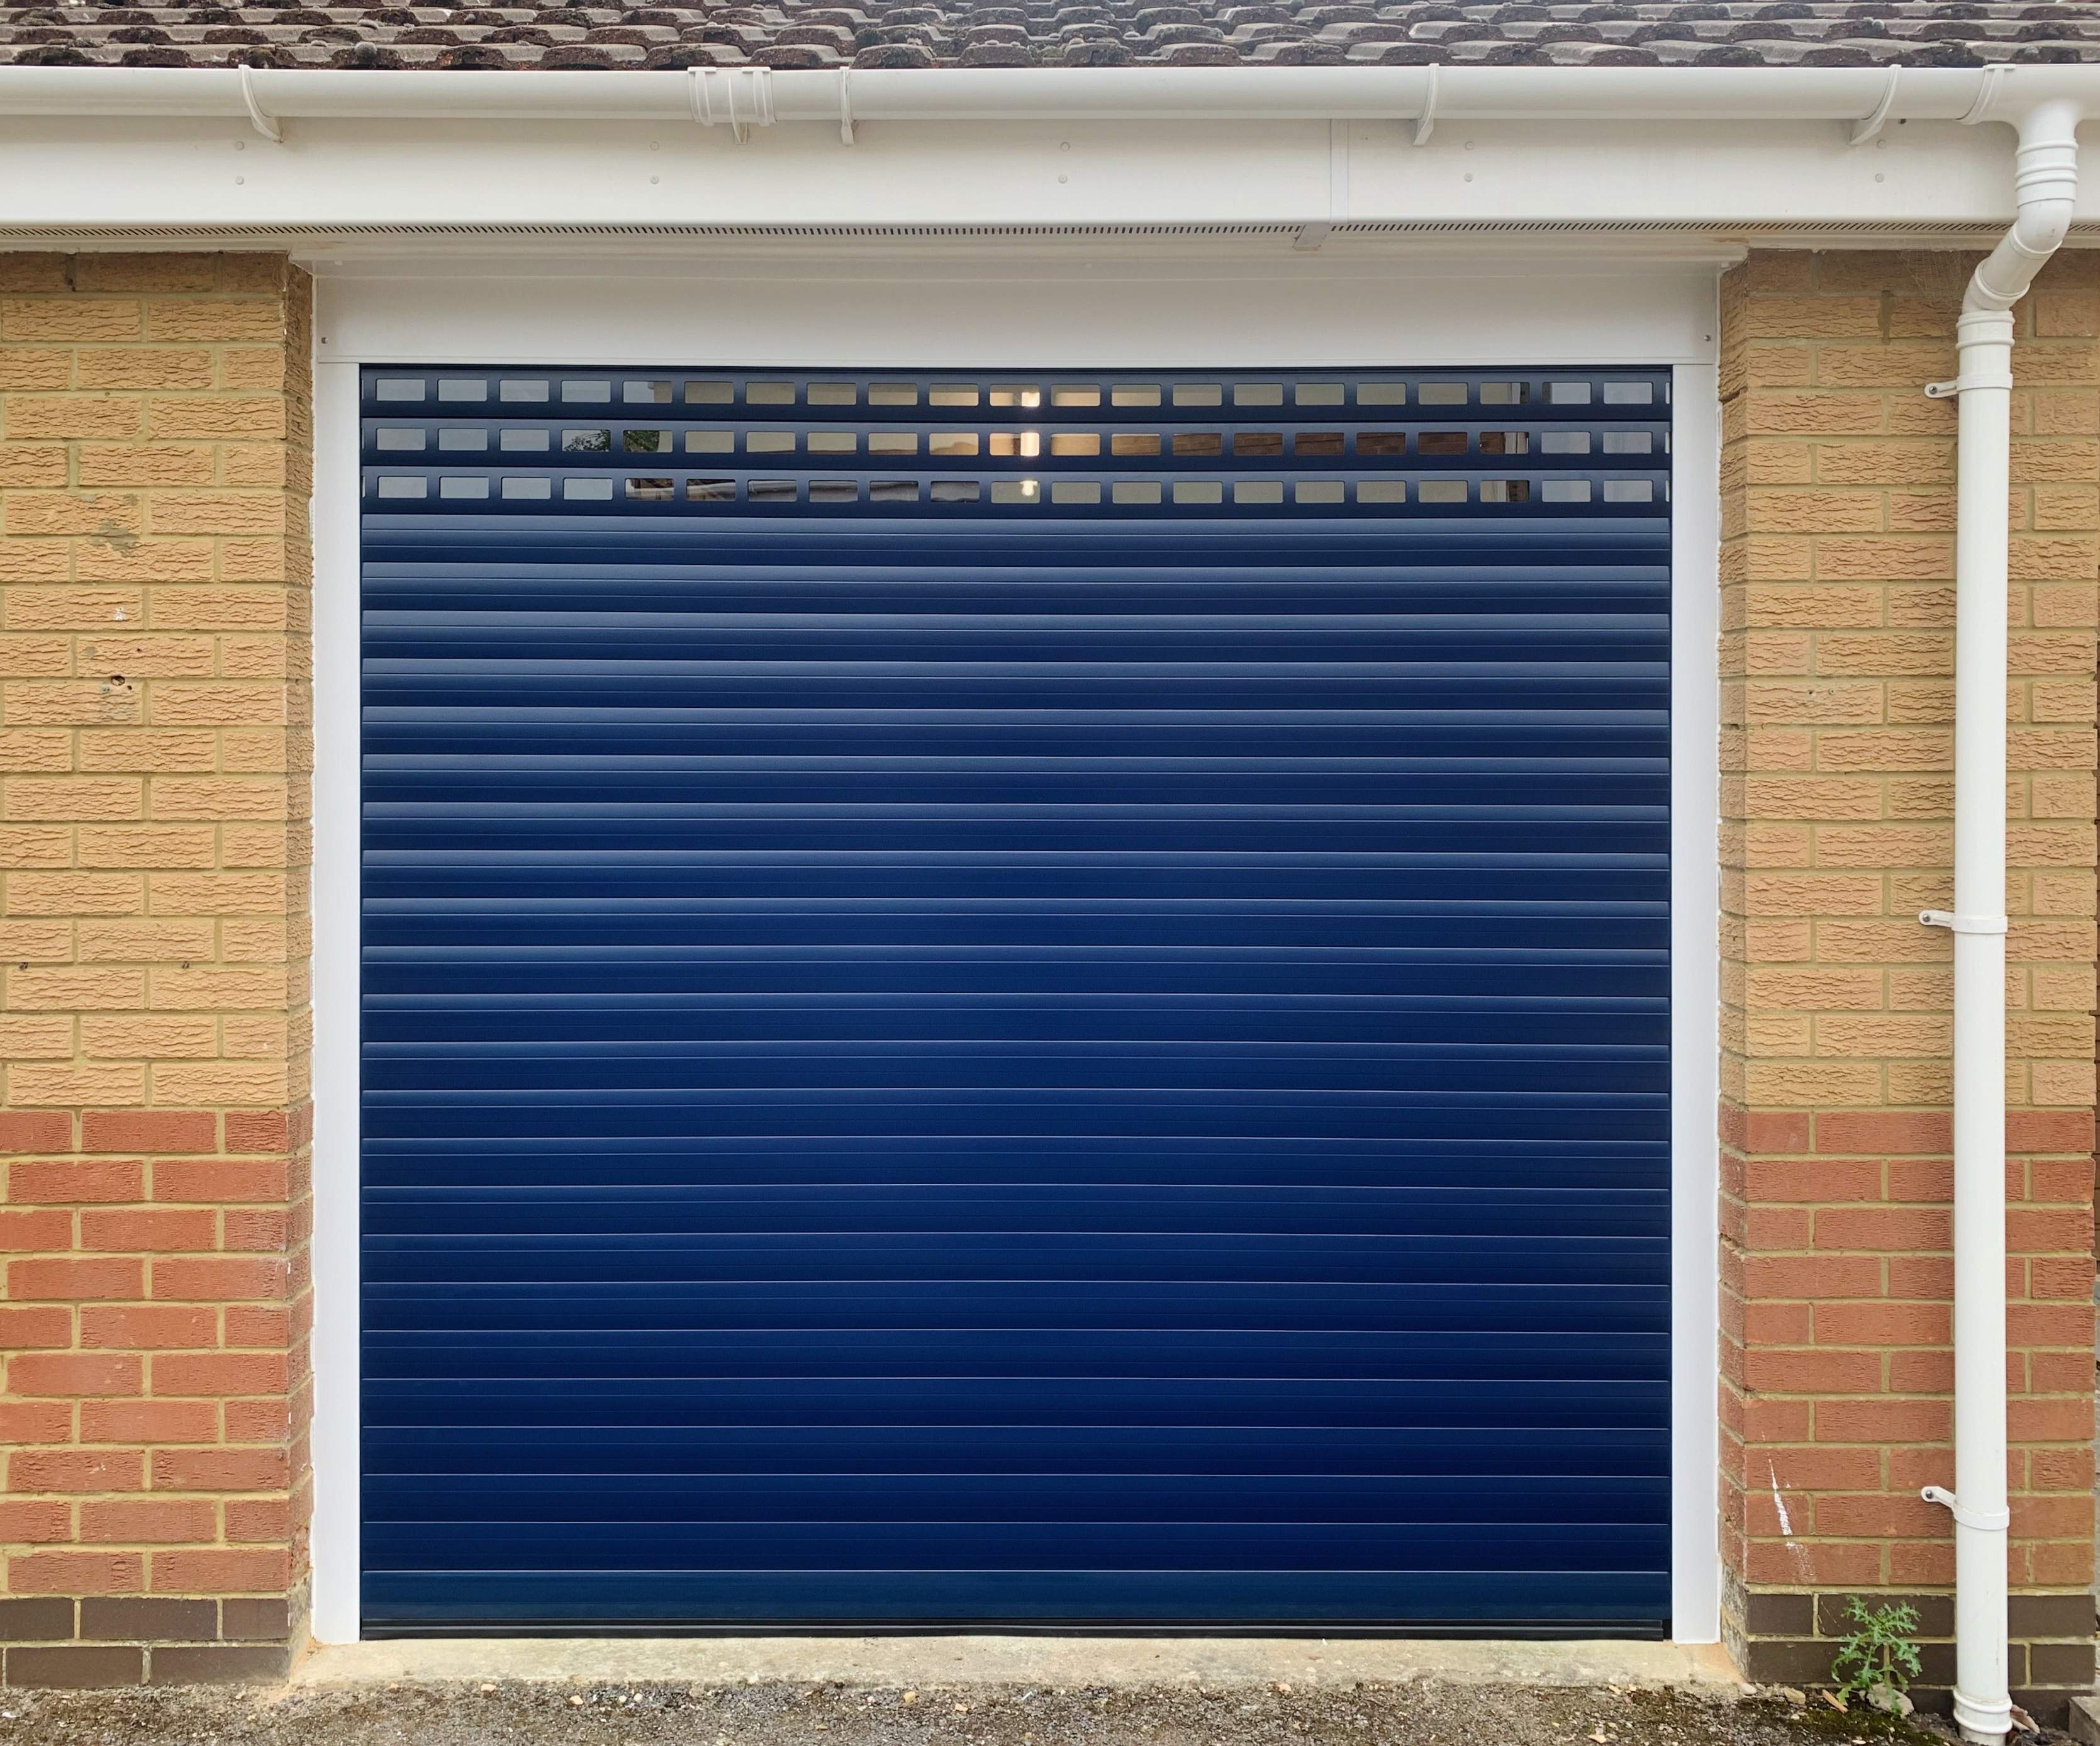 Single Insulated 55mm Lath (Blue) Roller Shutter Garage Door with White Frame and windows.